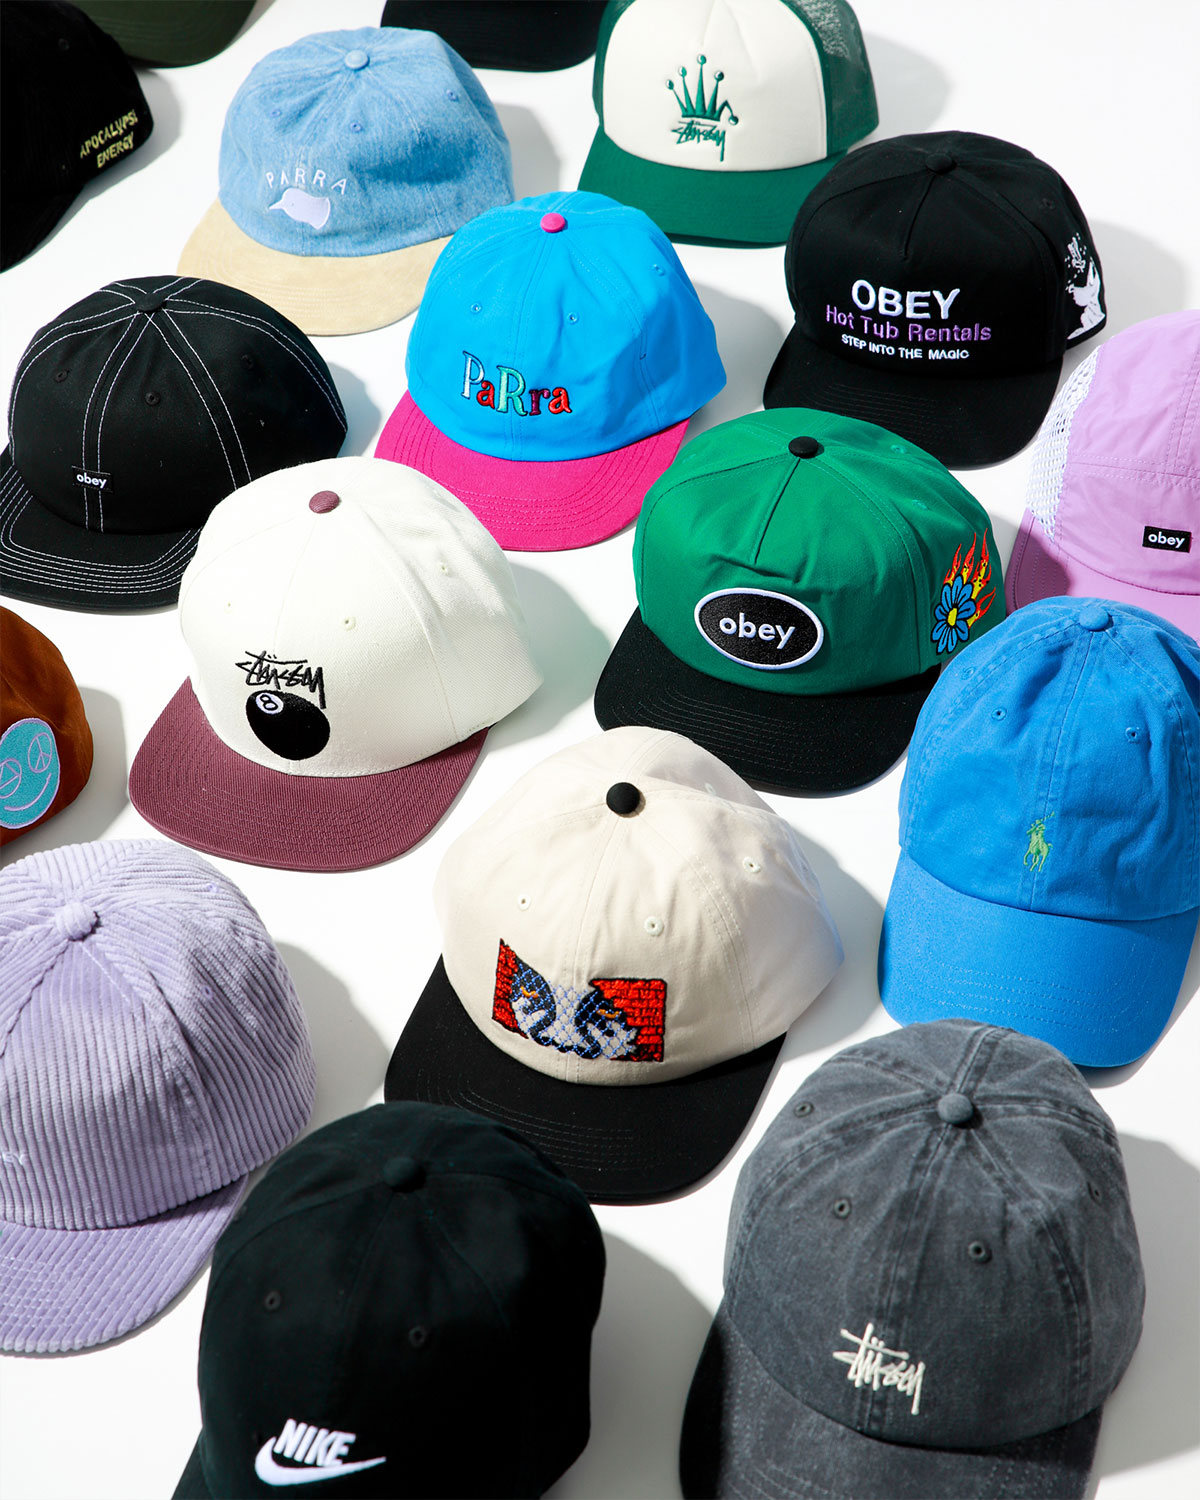 Discover our entire headwear collection